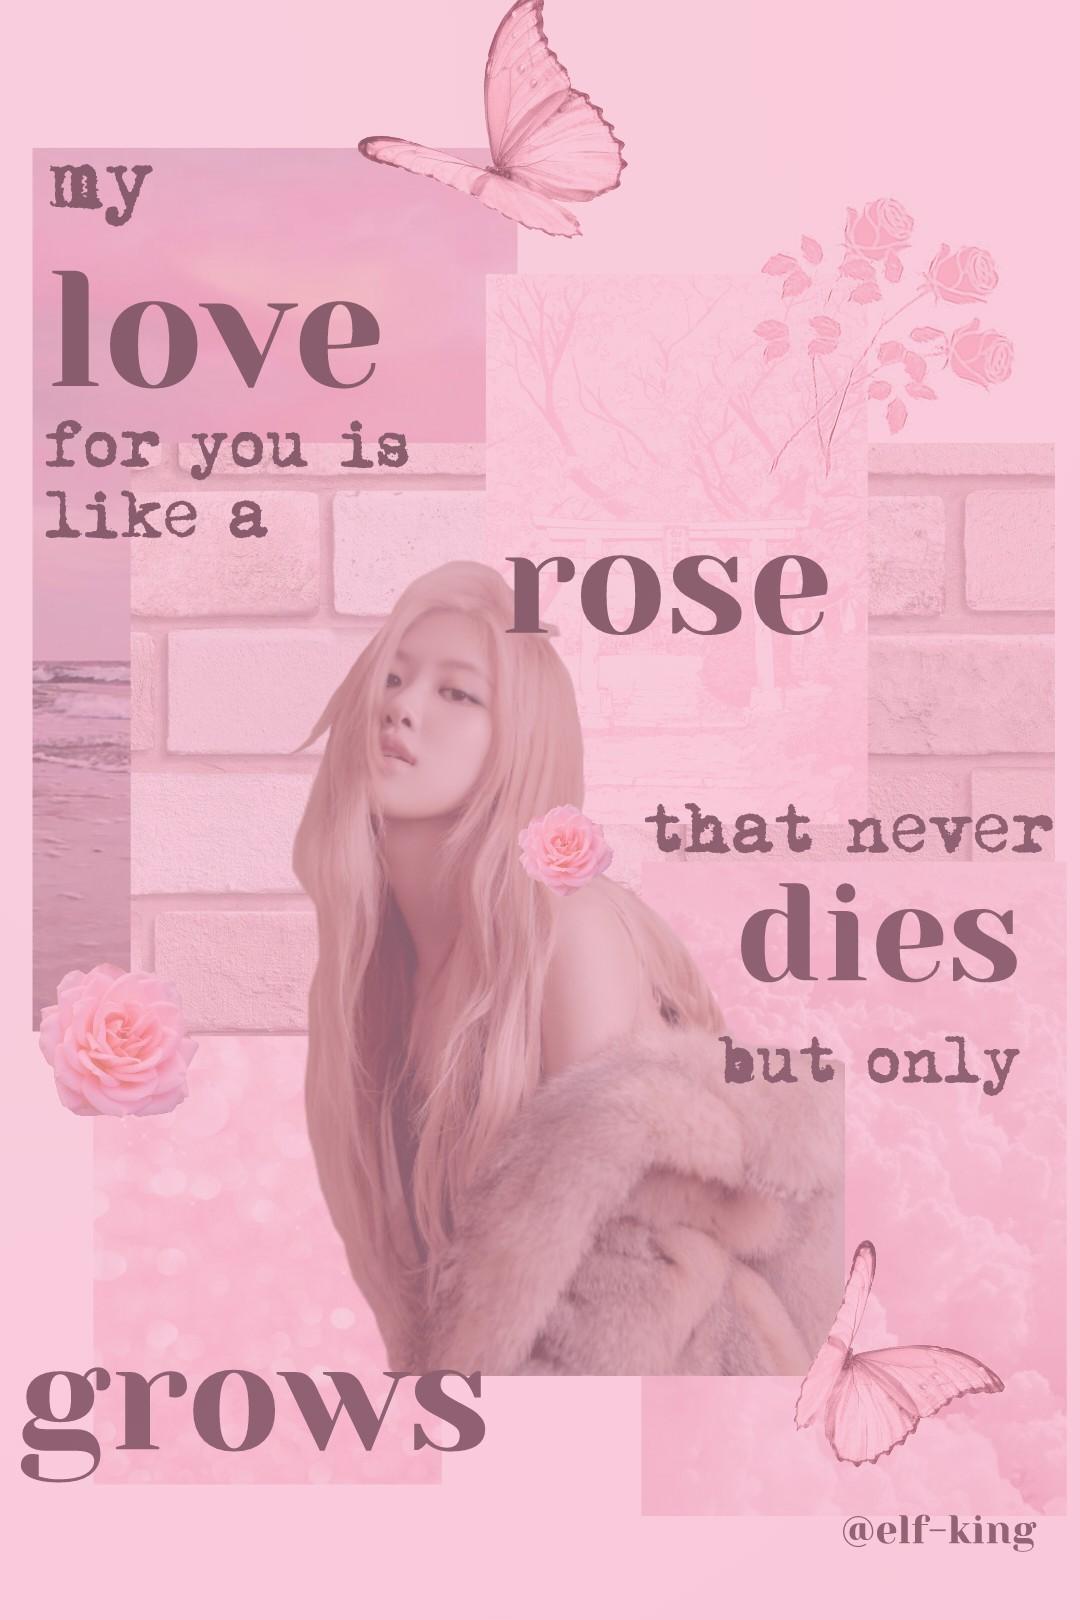 Basically all pink collage staring the amazing rosé from BLACKPINK
don't @ me they have some good songs, okay?
Happy holidays!